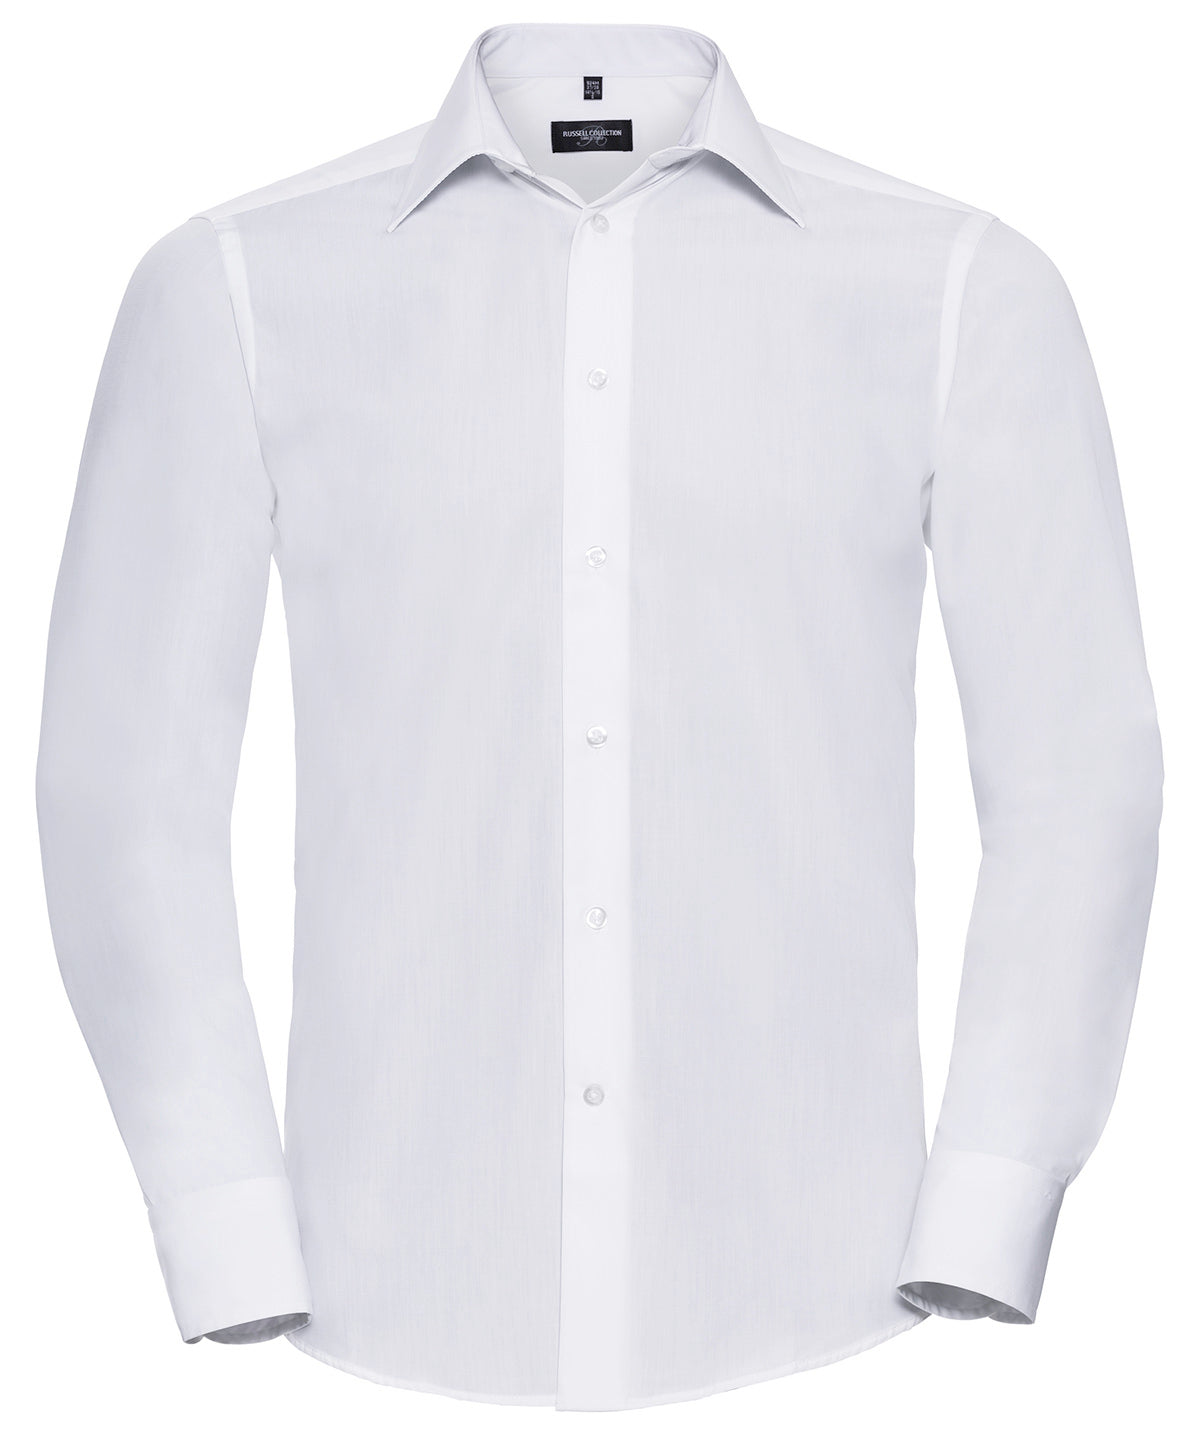 Long Sleeve Polycotton Easycare Fitted Poplin Shirt